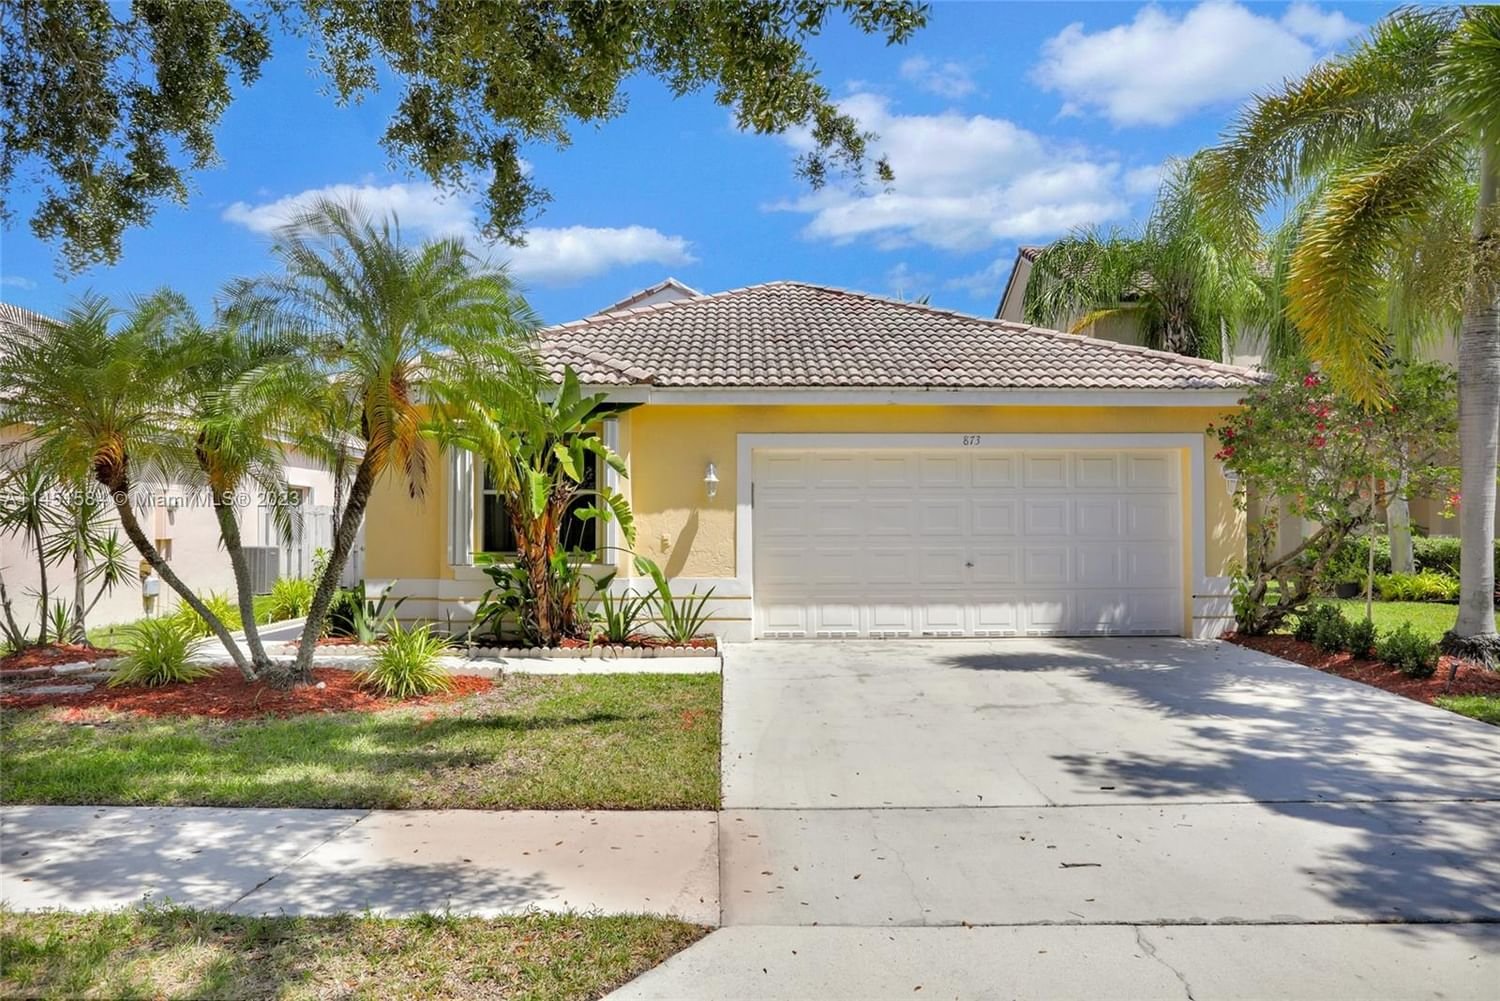 Real estate property located at 873 Briar Ridge Rd, Broward County, SECTOR 3 - PARCELS C D E, Weston, FL